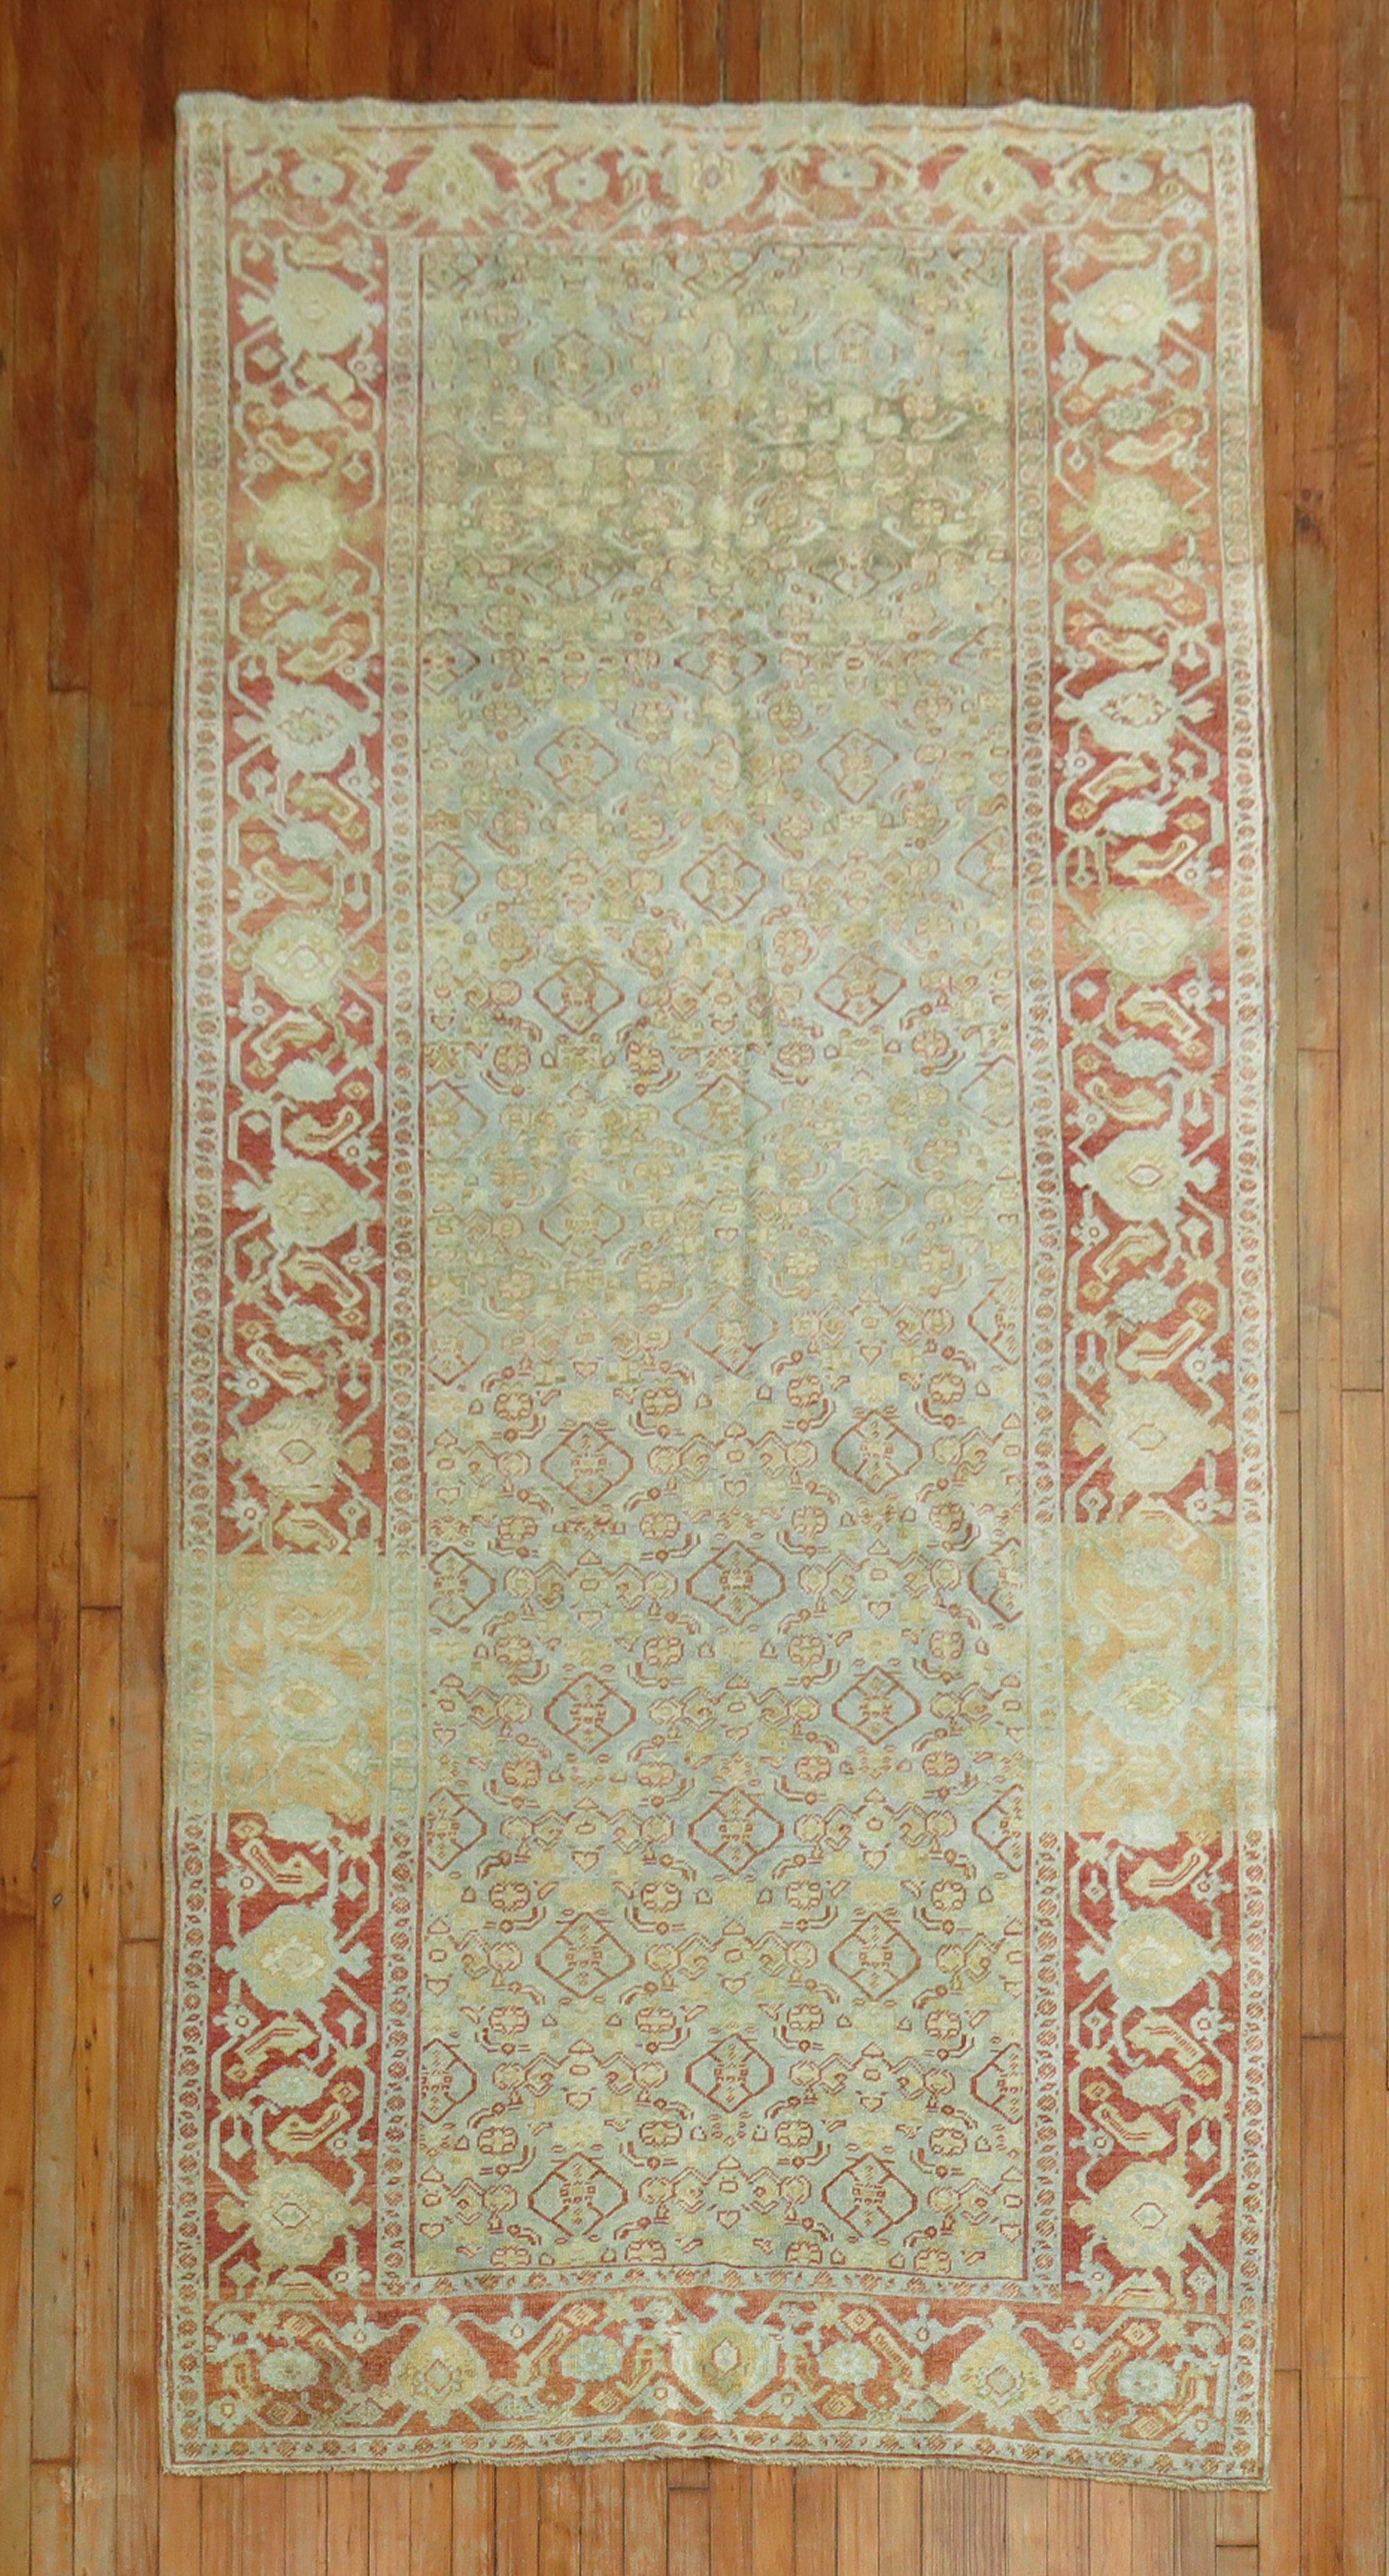 Early 20th century Persian Bidjar rug in cool blue gray-green and red tones

Measures: 5' x 10'4''.

  